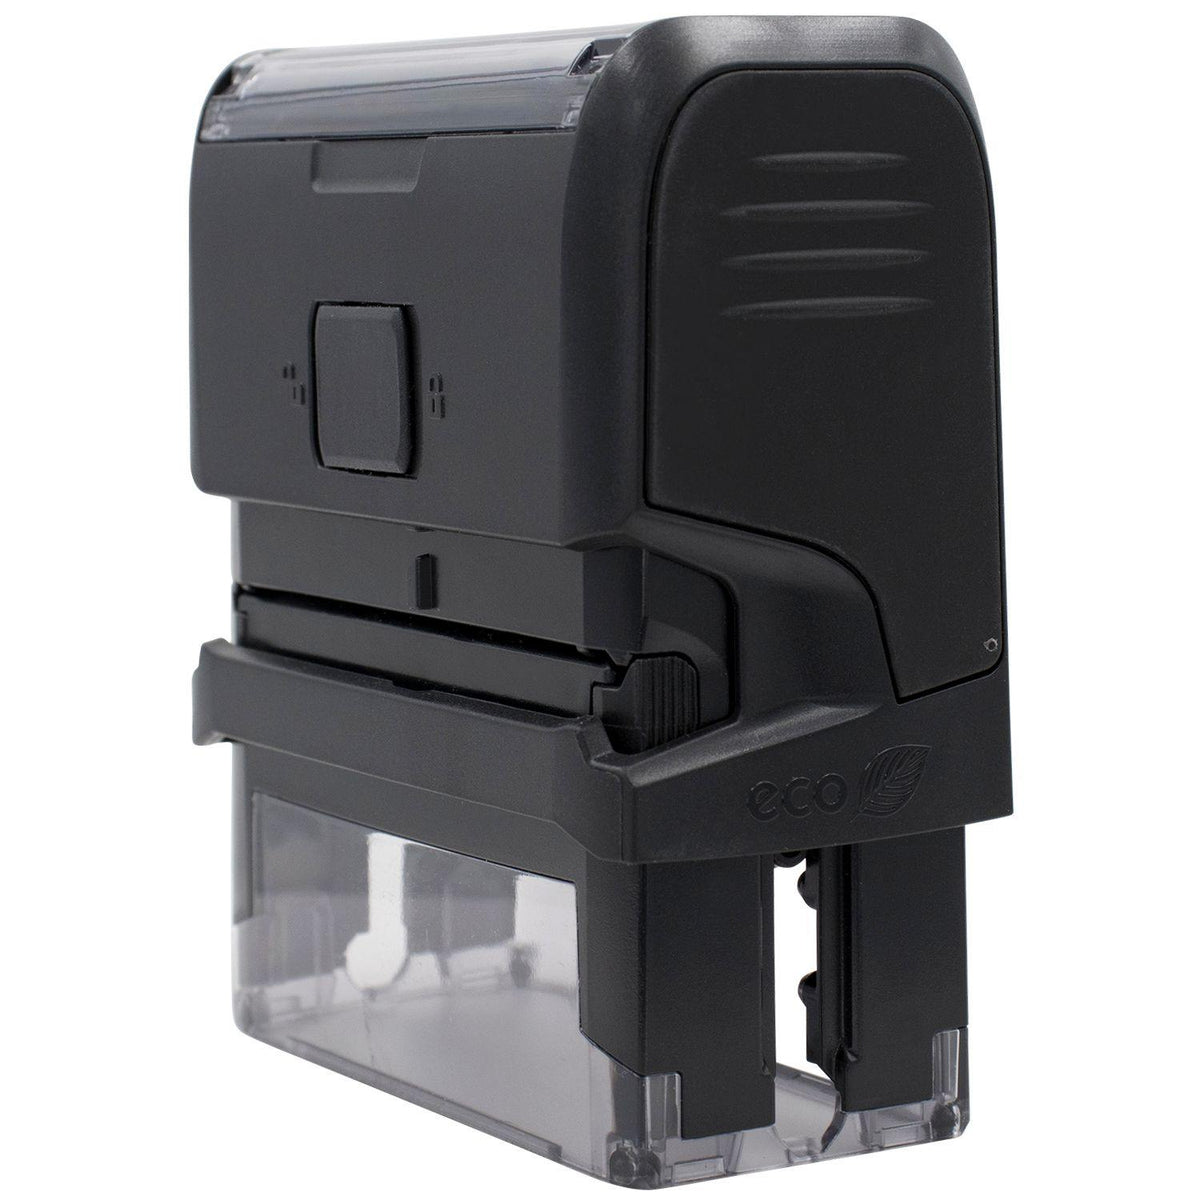 Large Self-Inking Recibido Stamp - Engineer Seal Stamps - Brand_Trodat, Impression Size_Large, Stamp Type_Self-Inking Stamp, Type of Use_Office, Type of Use_Postal &amp; Mailing, Type of Use_Shipping &amp; Receiving